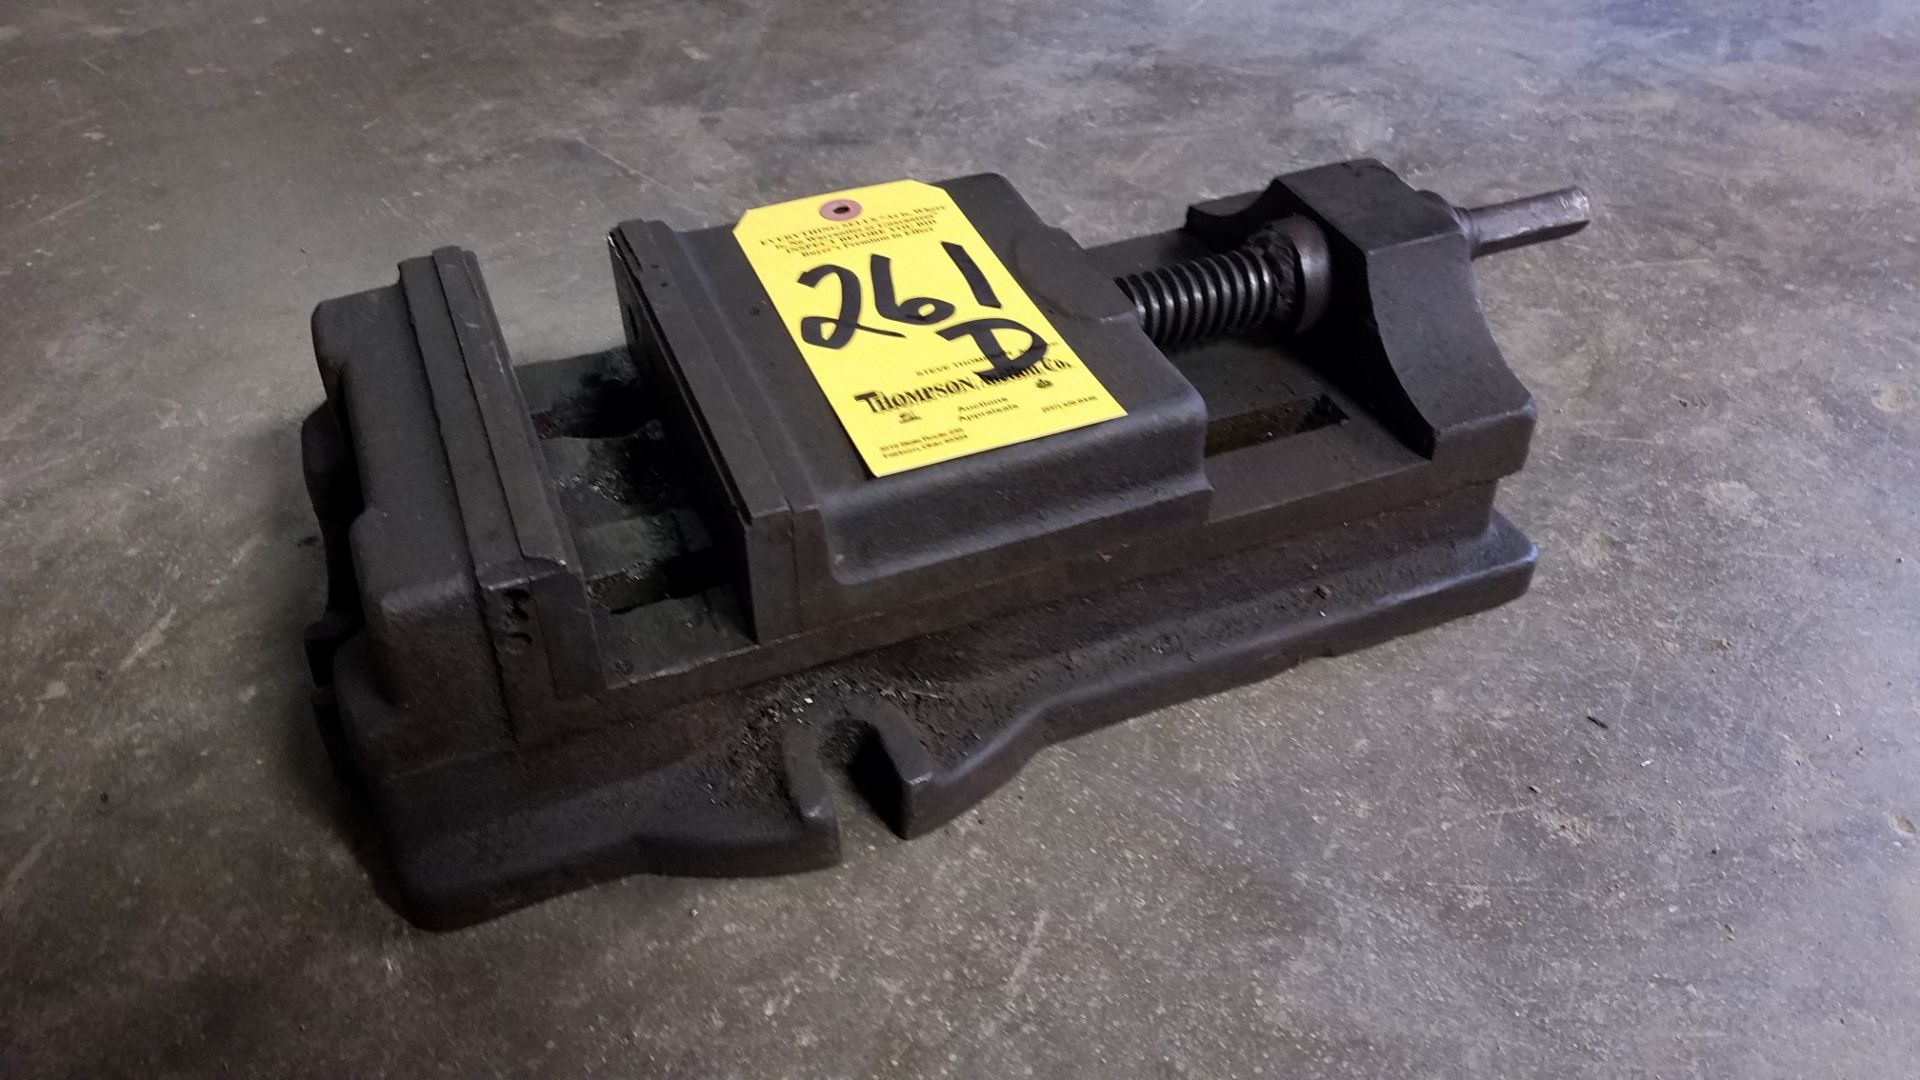 6" Mill Vise